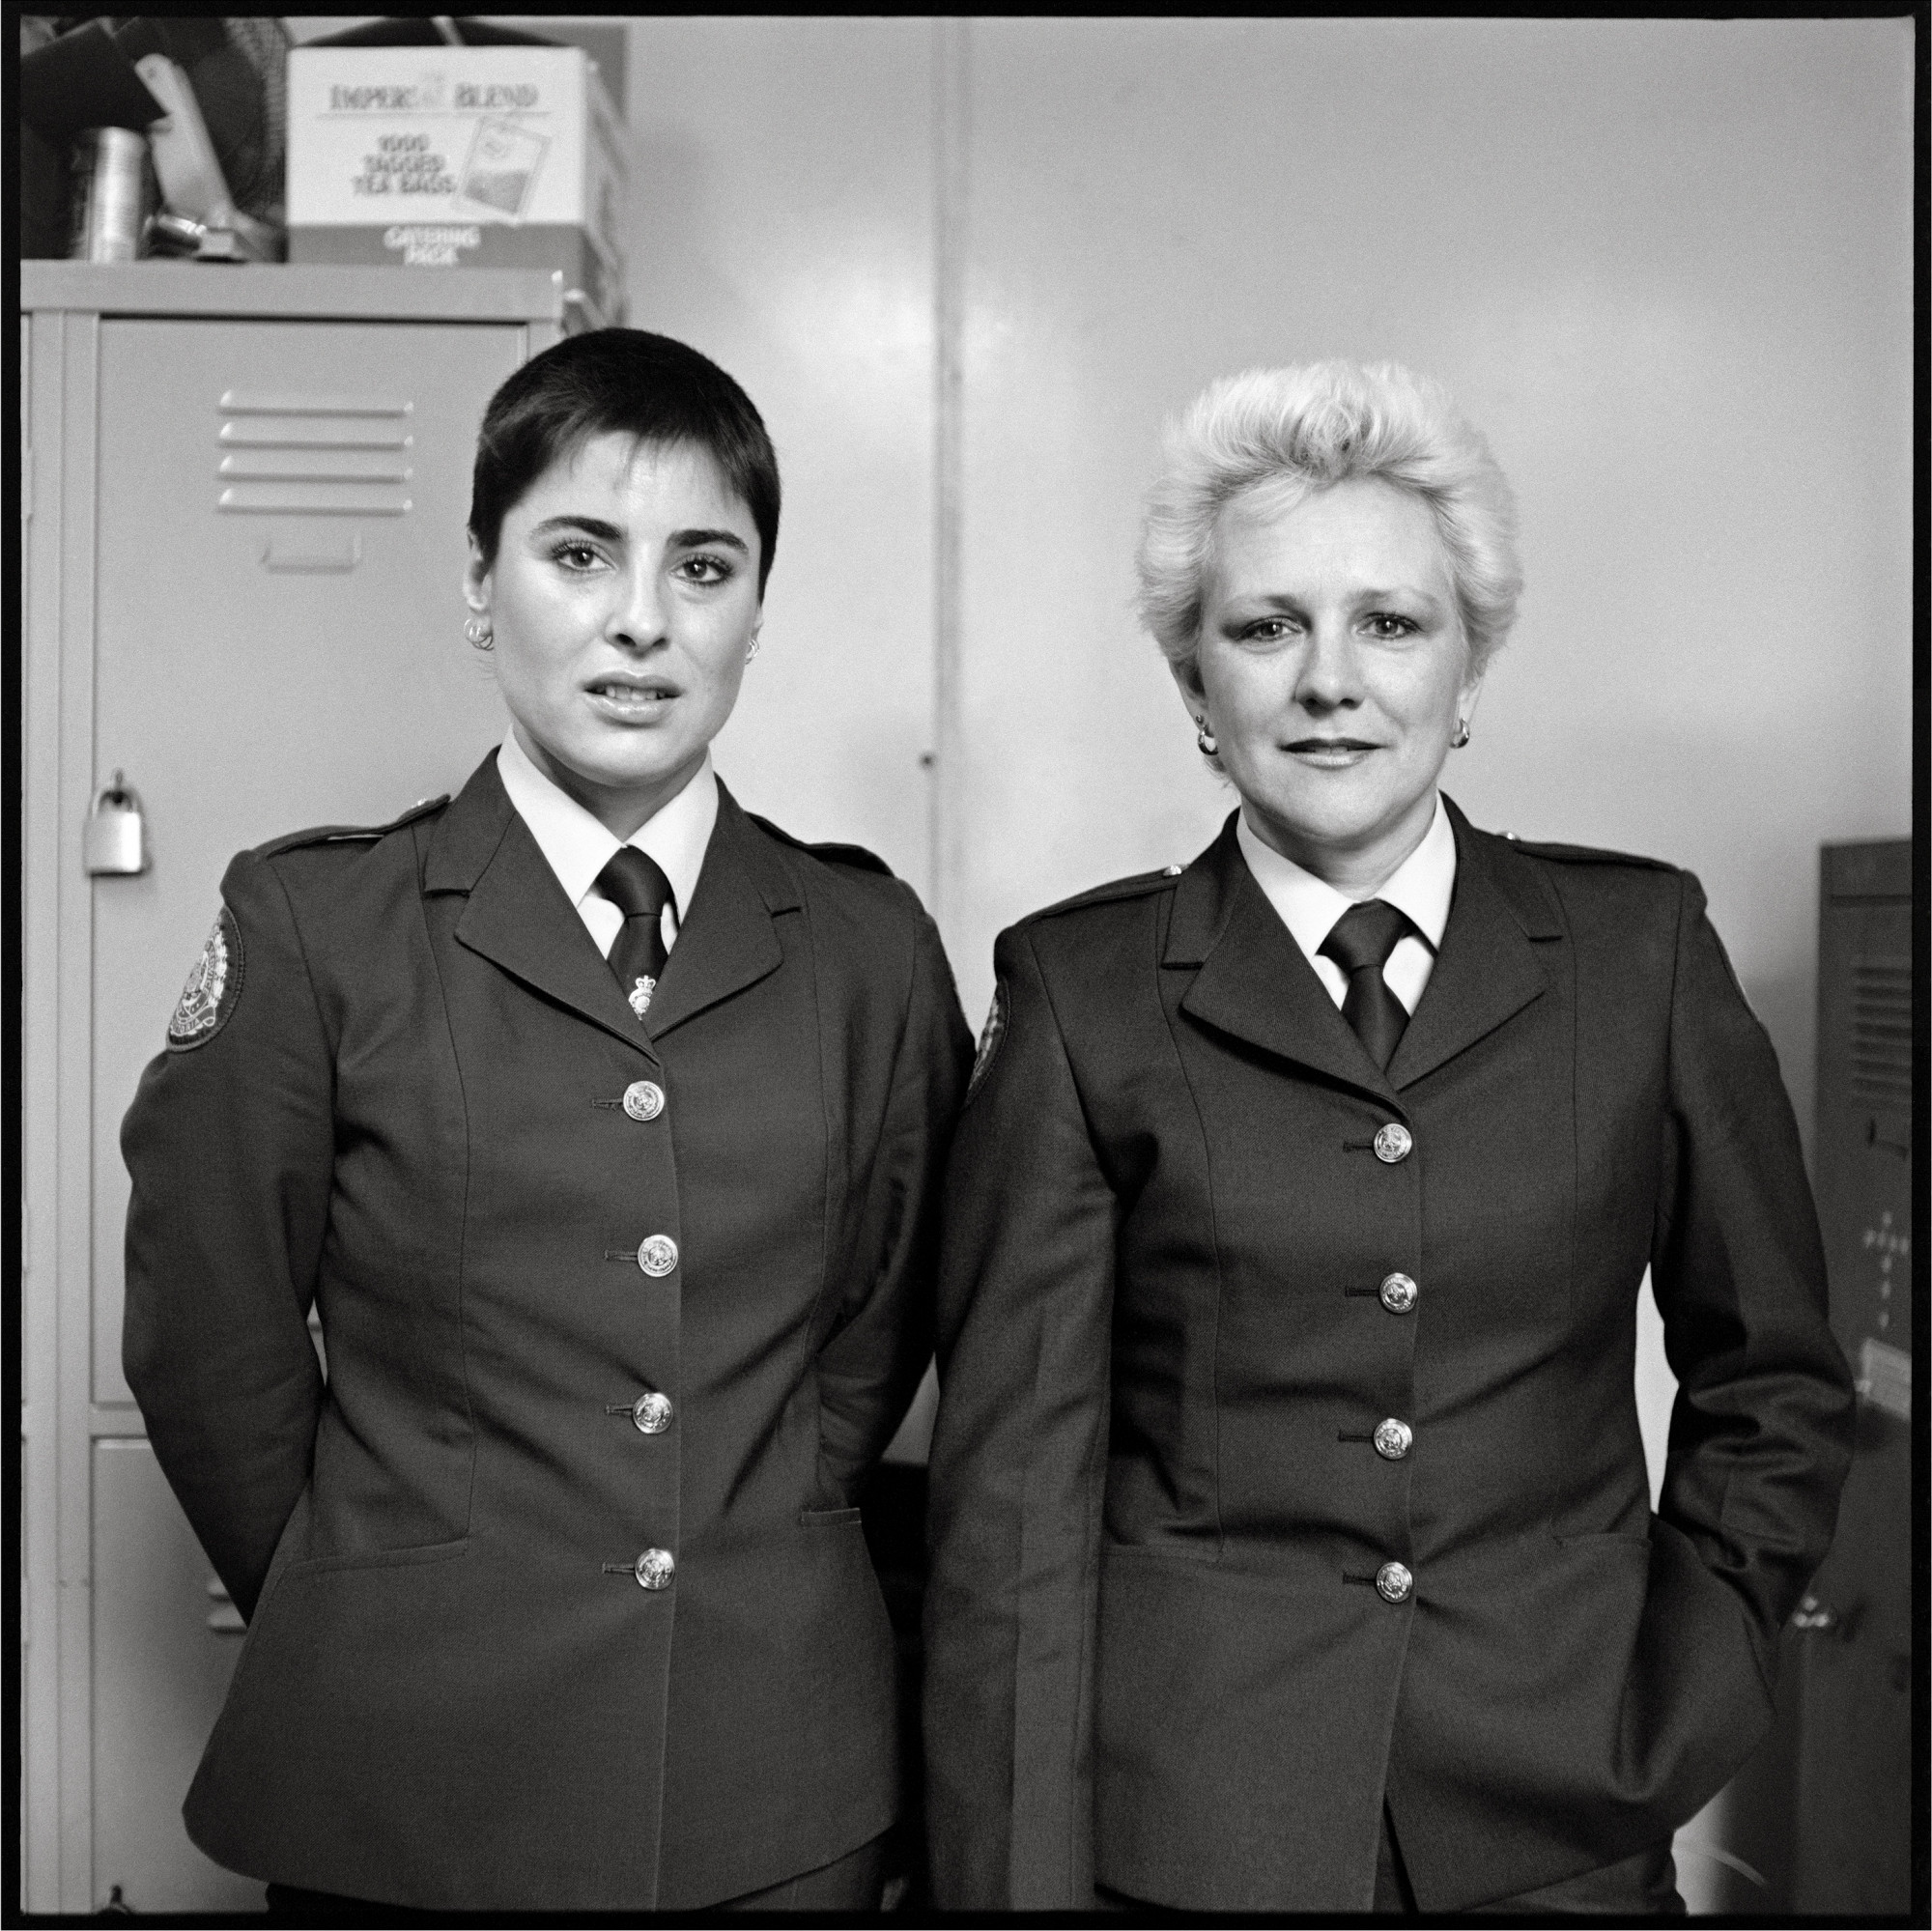 Ruth Maddison, <em>Prison Officers, Pentridge</em>, 1985, pigment print from scanned negative (Print by Les Walkling), 50 x 50 cm (image size). Courtesy of the artist and the Centre for Contemporary Photography.